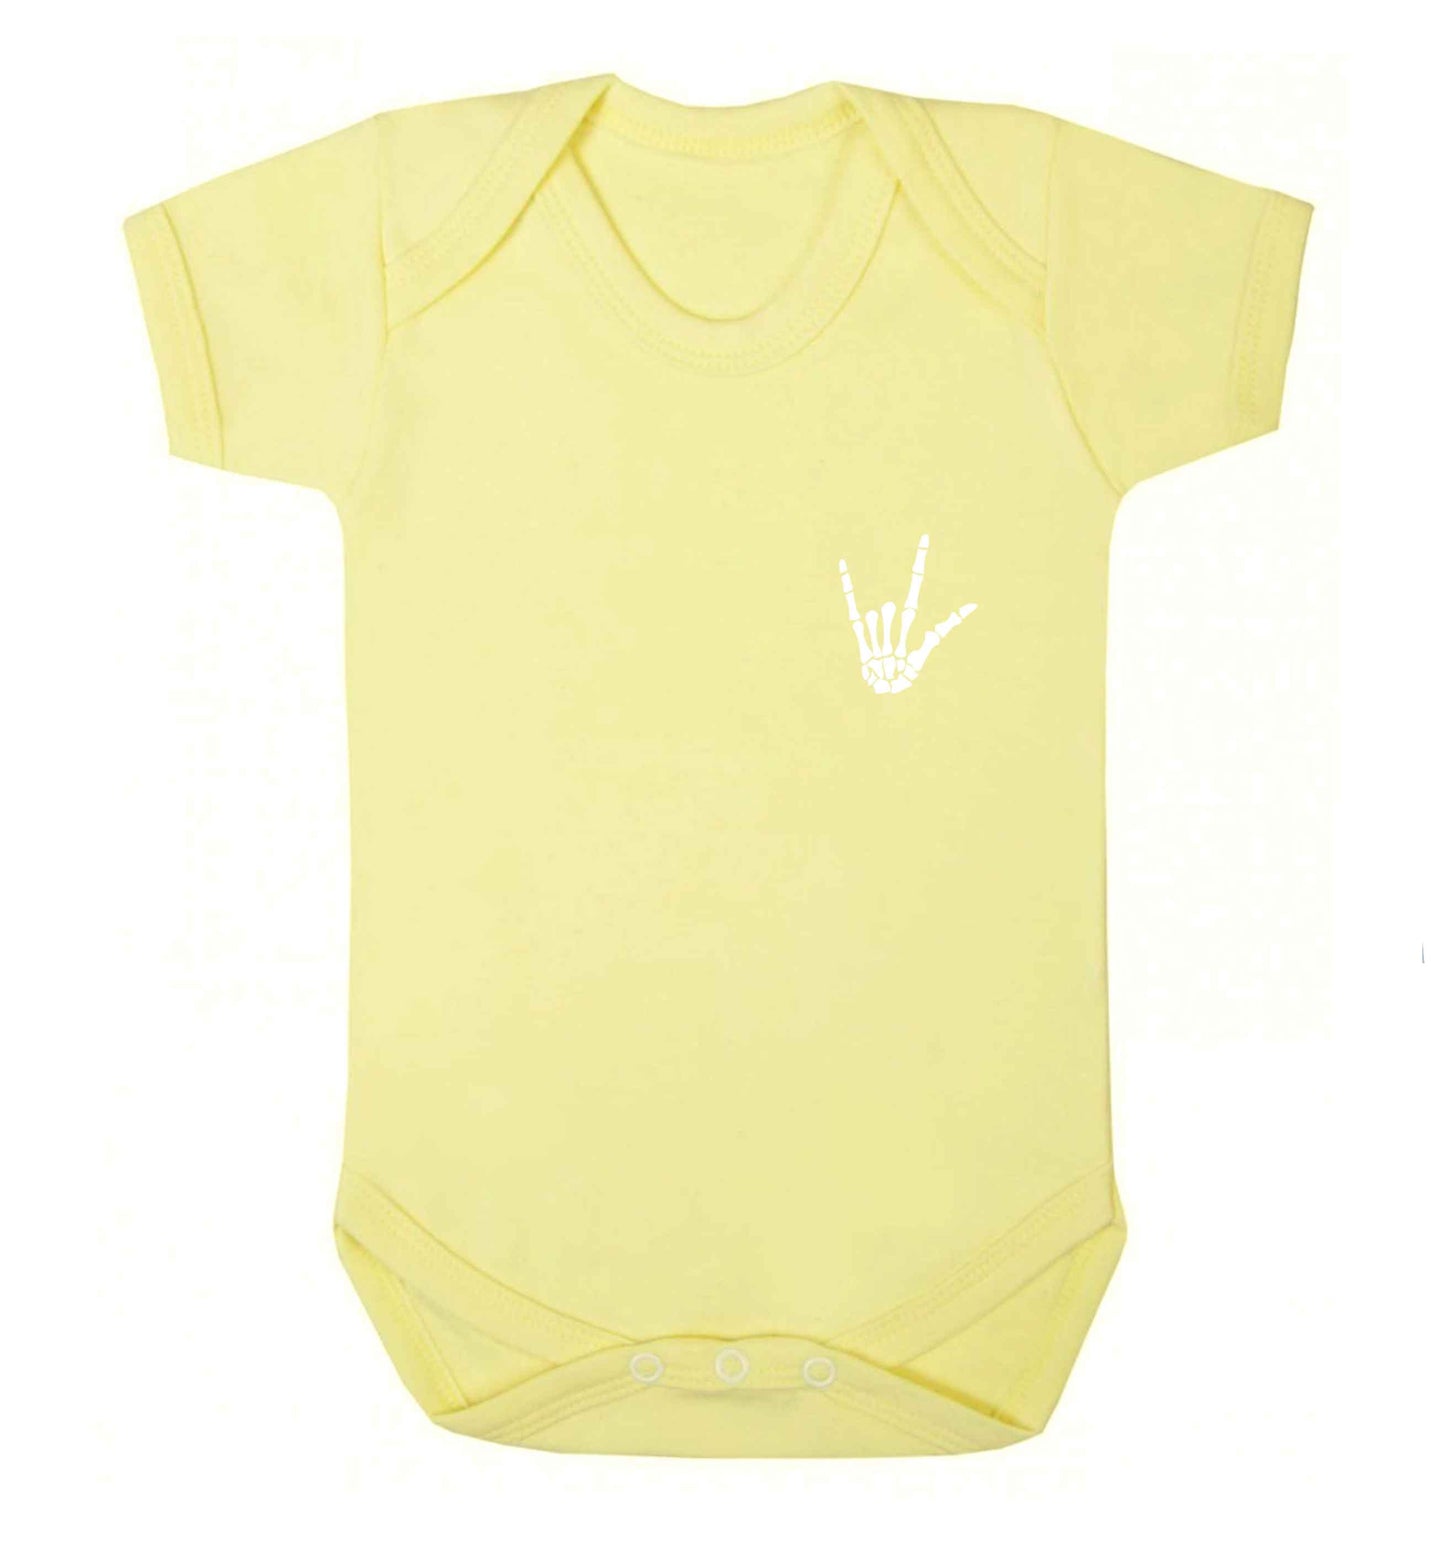 Skeleton Hand Pocket baby vest pale yellow 18-24 months